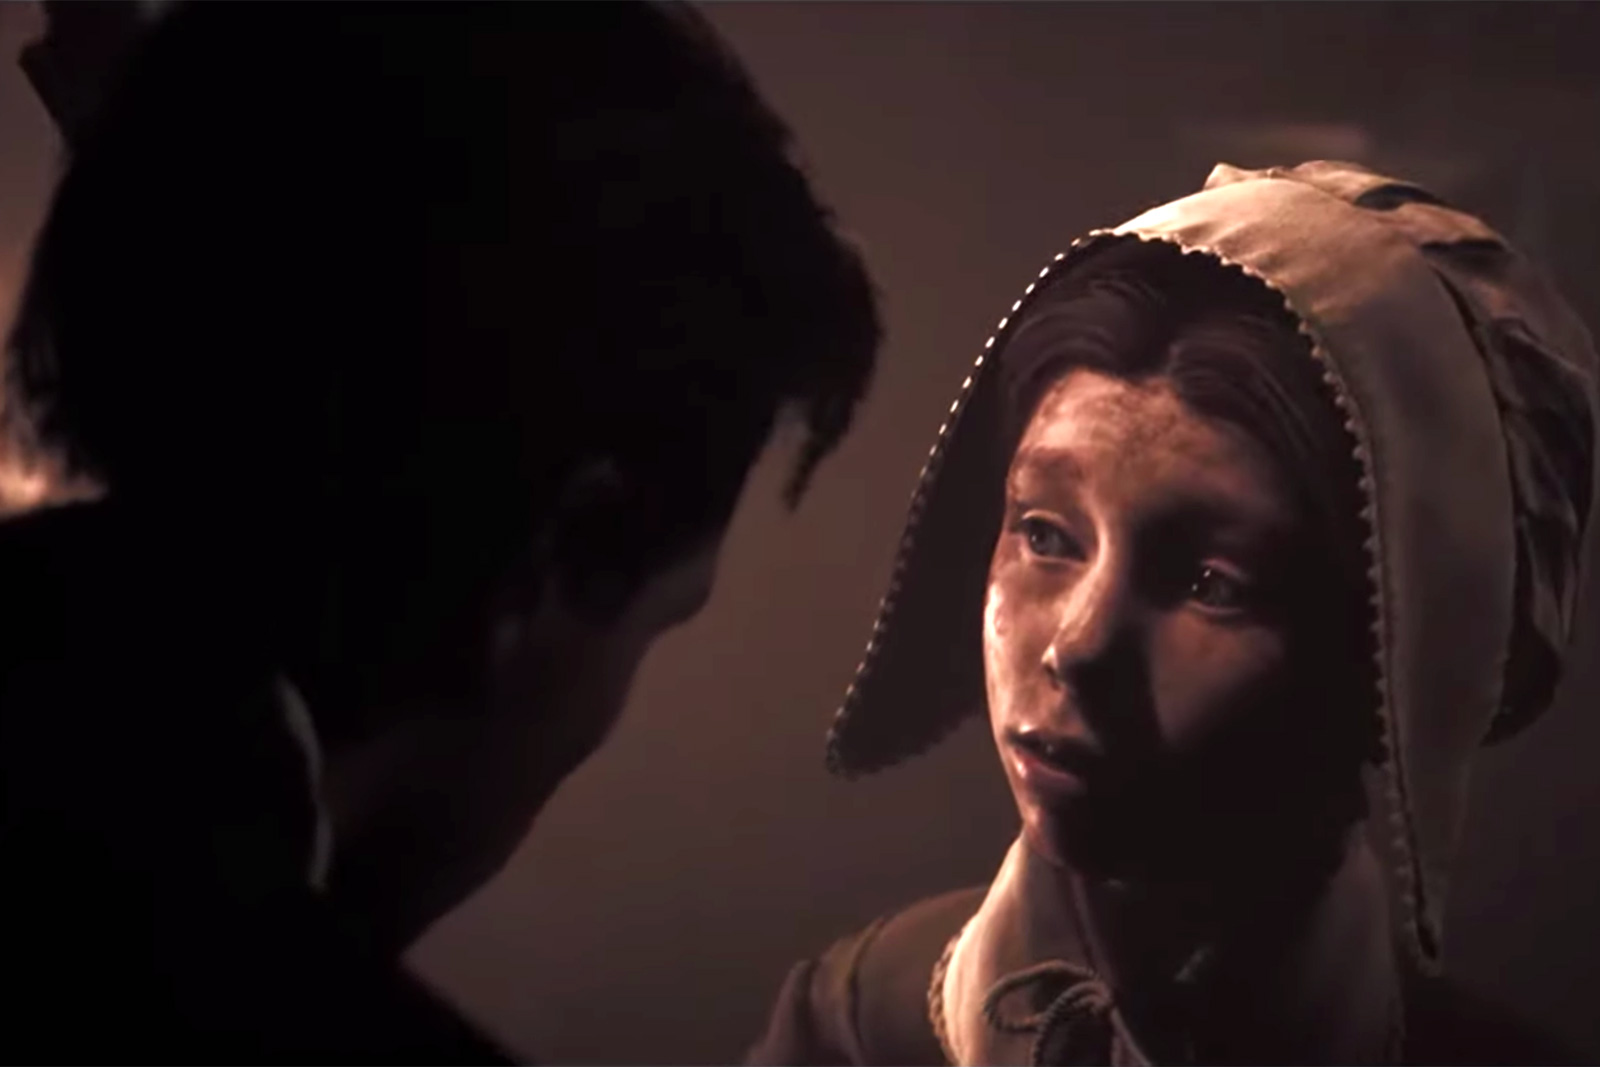 ‘Dark Pictures: Little Hope’ trailer shows horror from the age of witch hunts